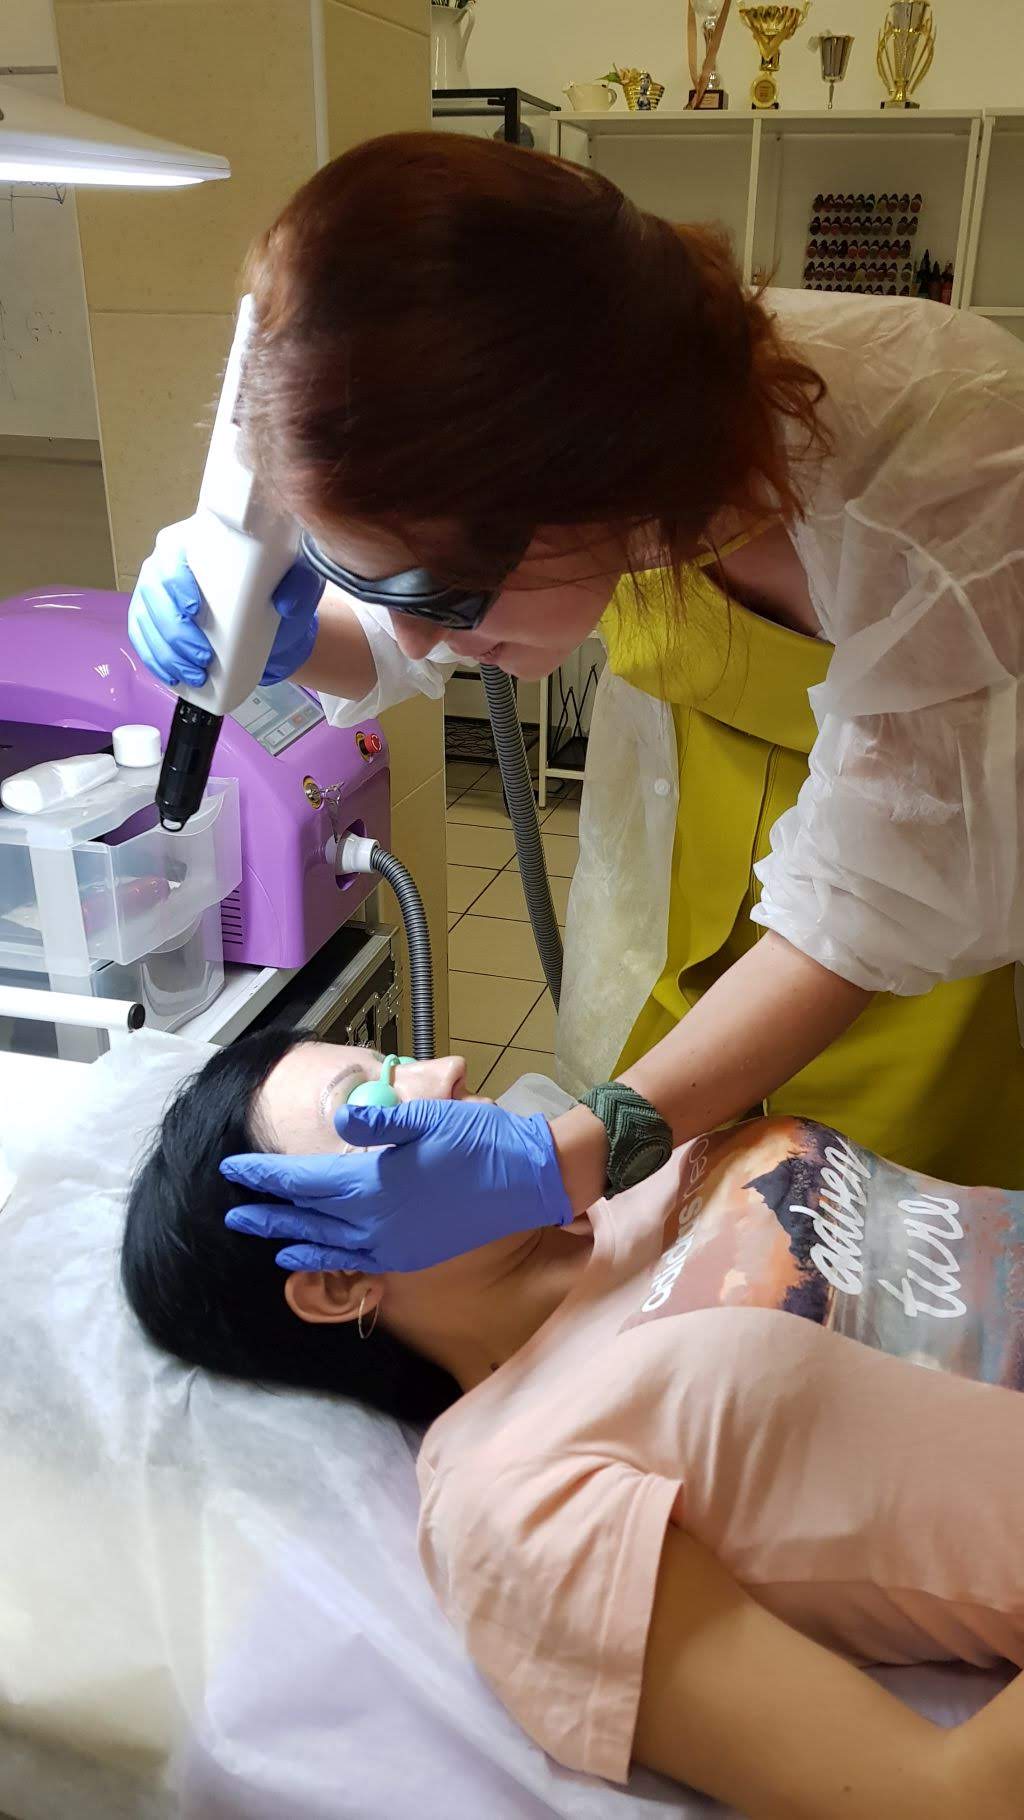 Laser Tattoo Removal Process. Cosmetic and Mediical Tattoo by Dasha. Permanent makeup and reconstructive tattoo, scalp micro-pigmentation in Christchurch, New Zealand